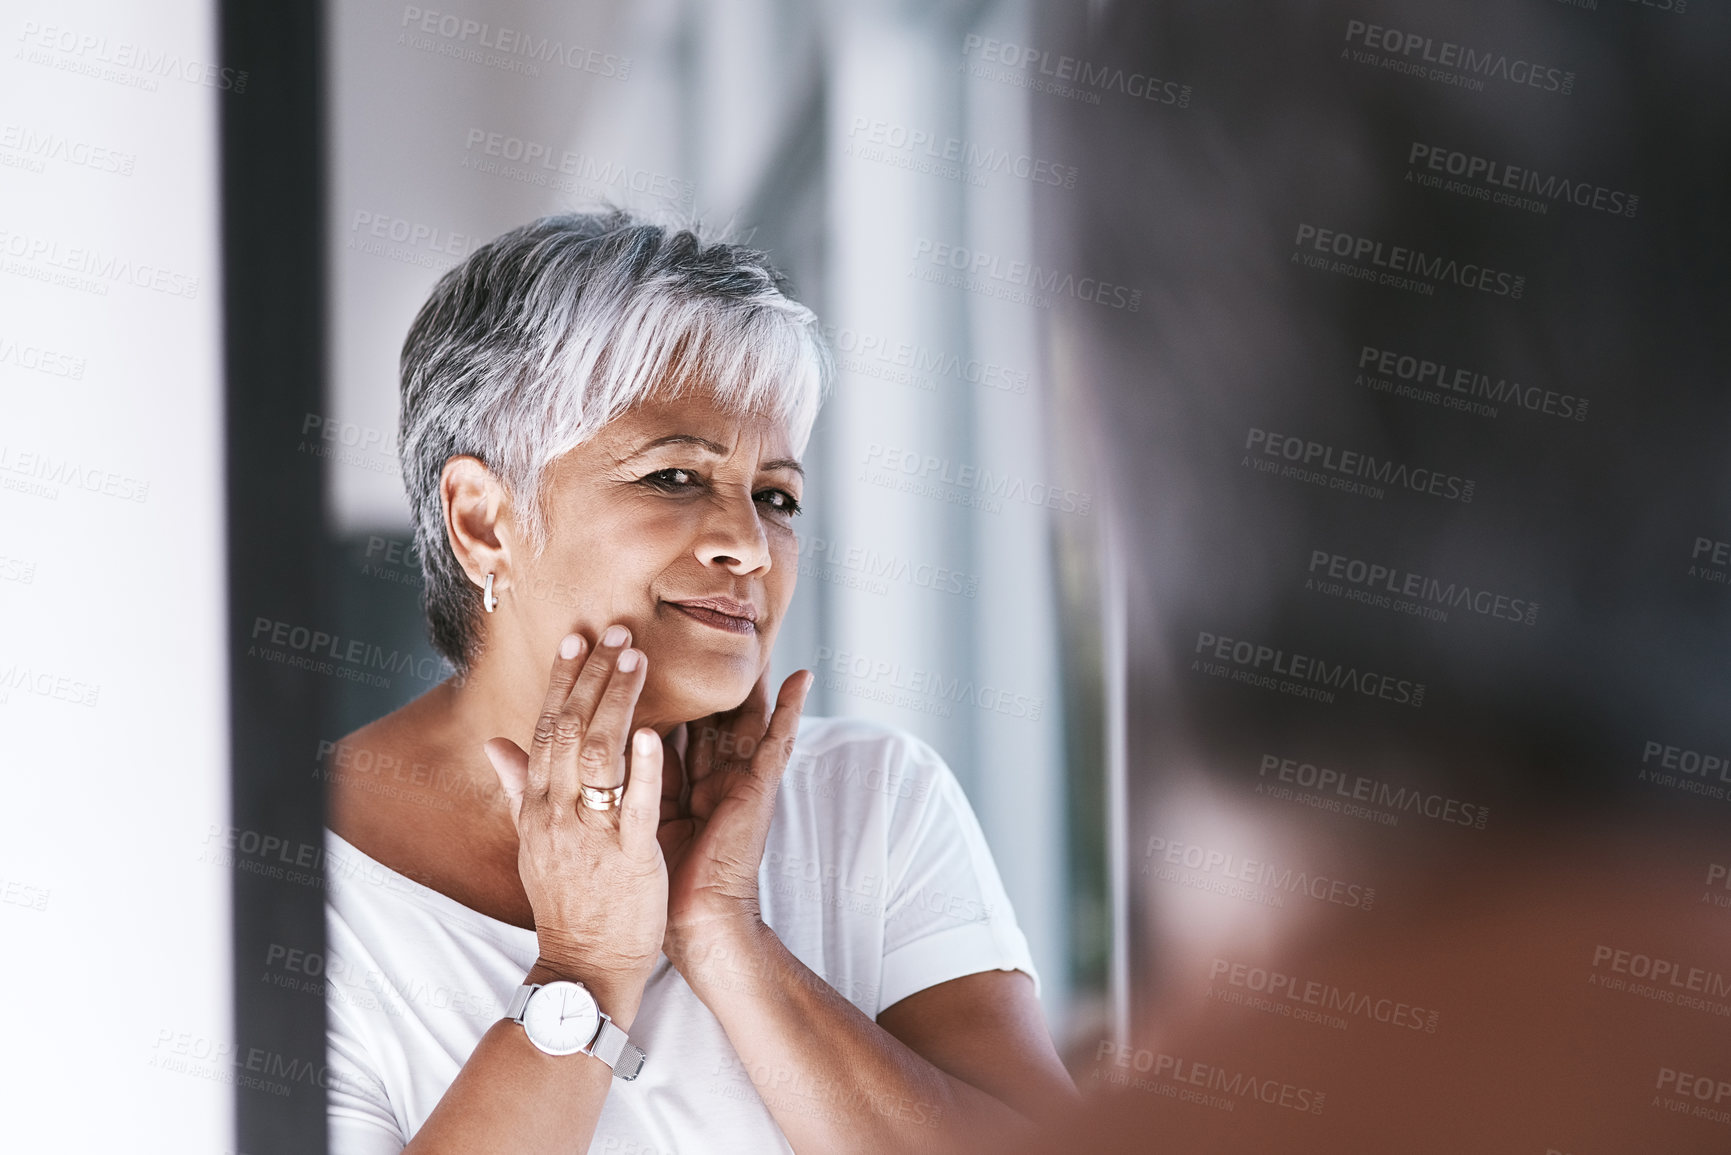 Buy stock photo Shot of a cheerful mature woman touching her face with her hands while looking at her reflection in a mirror